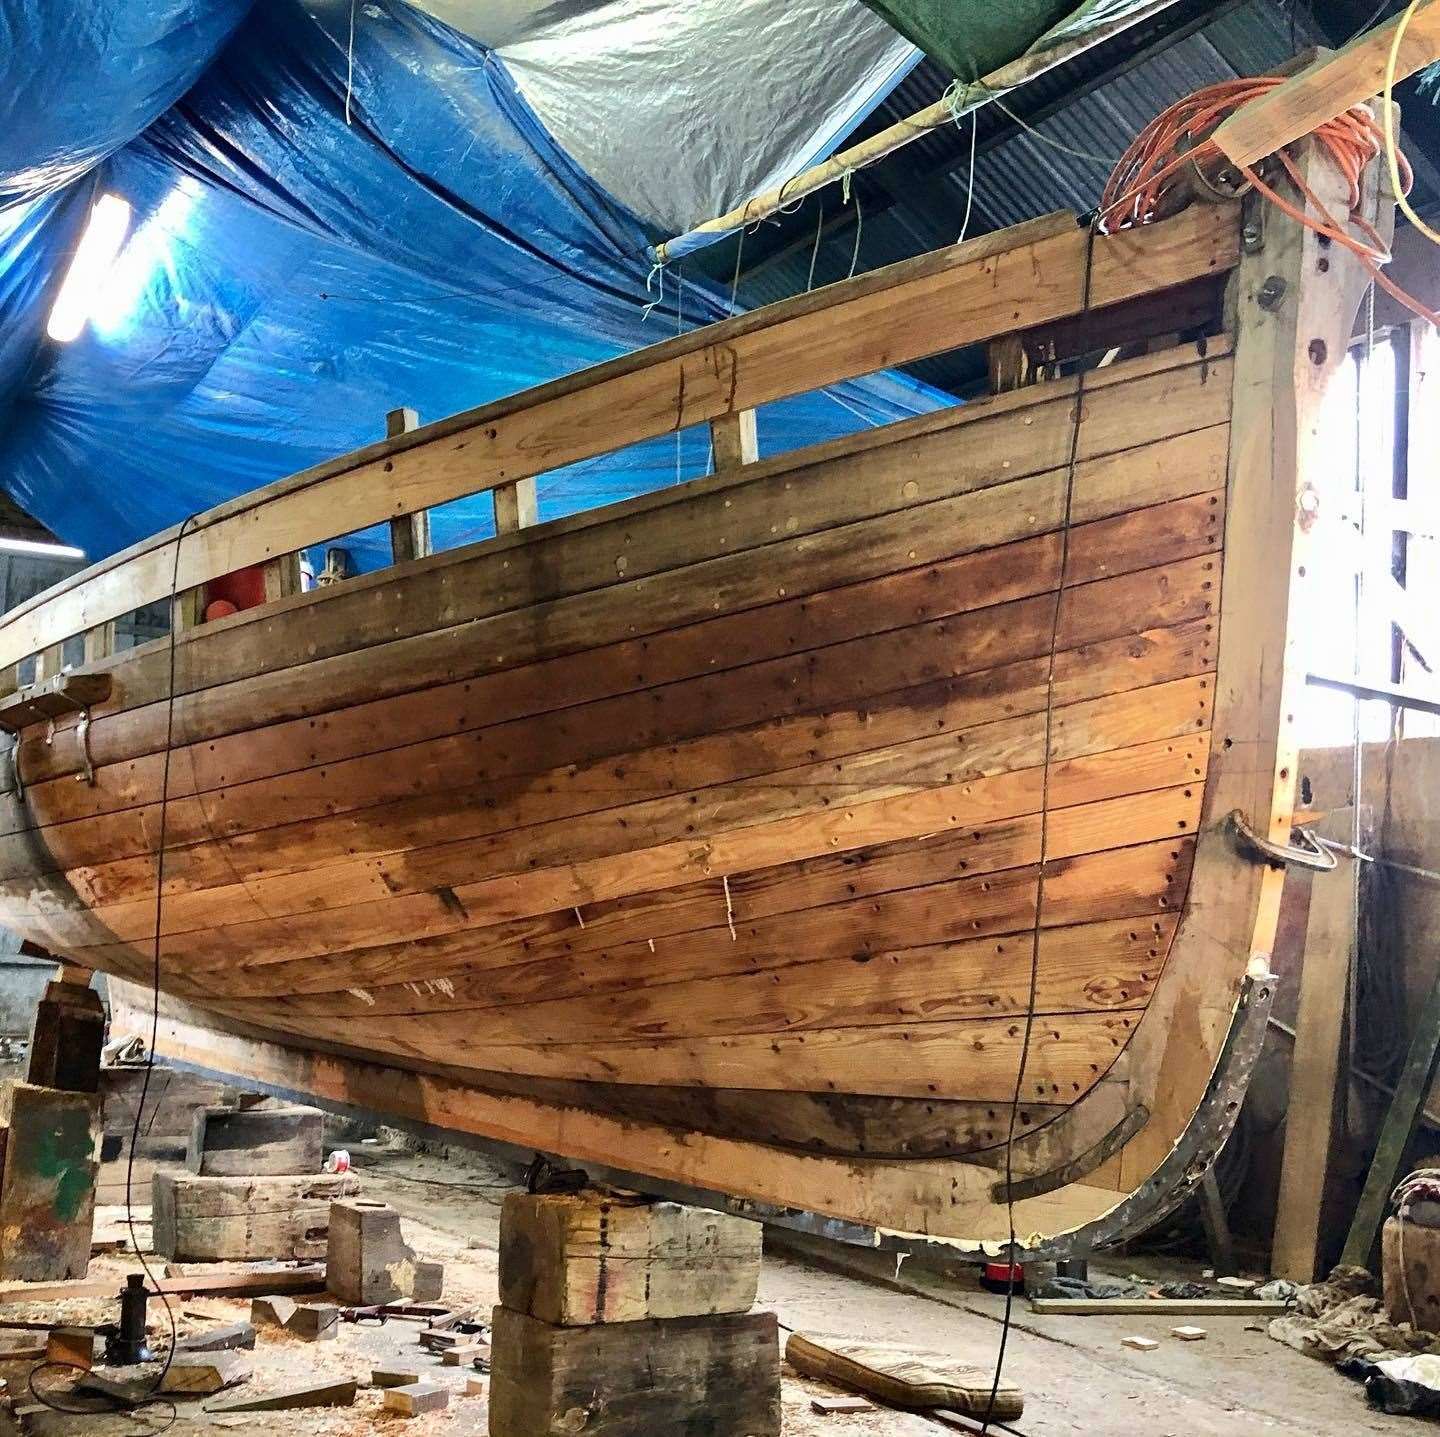 Hollowshore Moorings specialises in hand-crafted boats